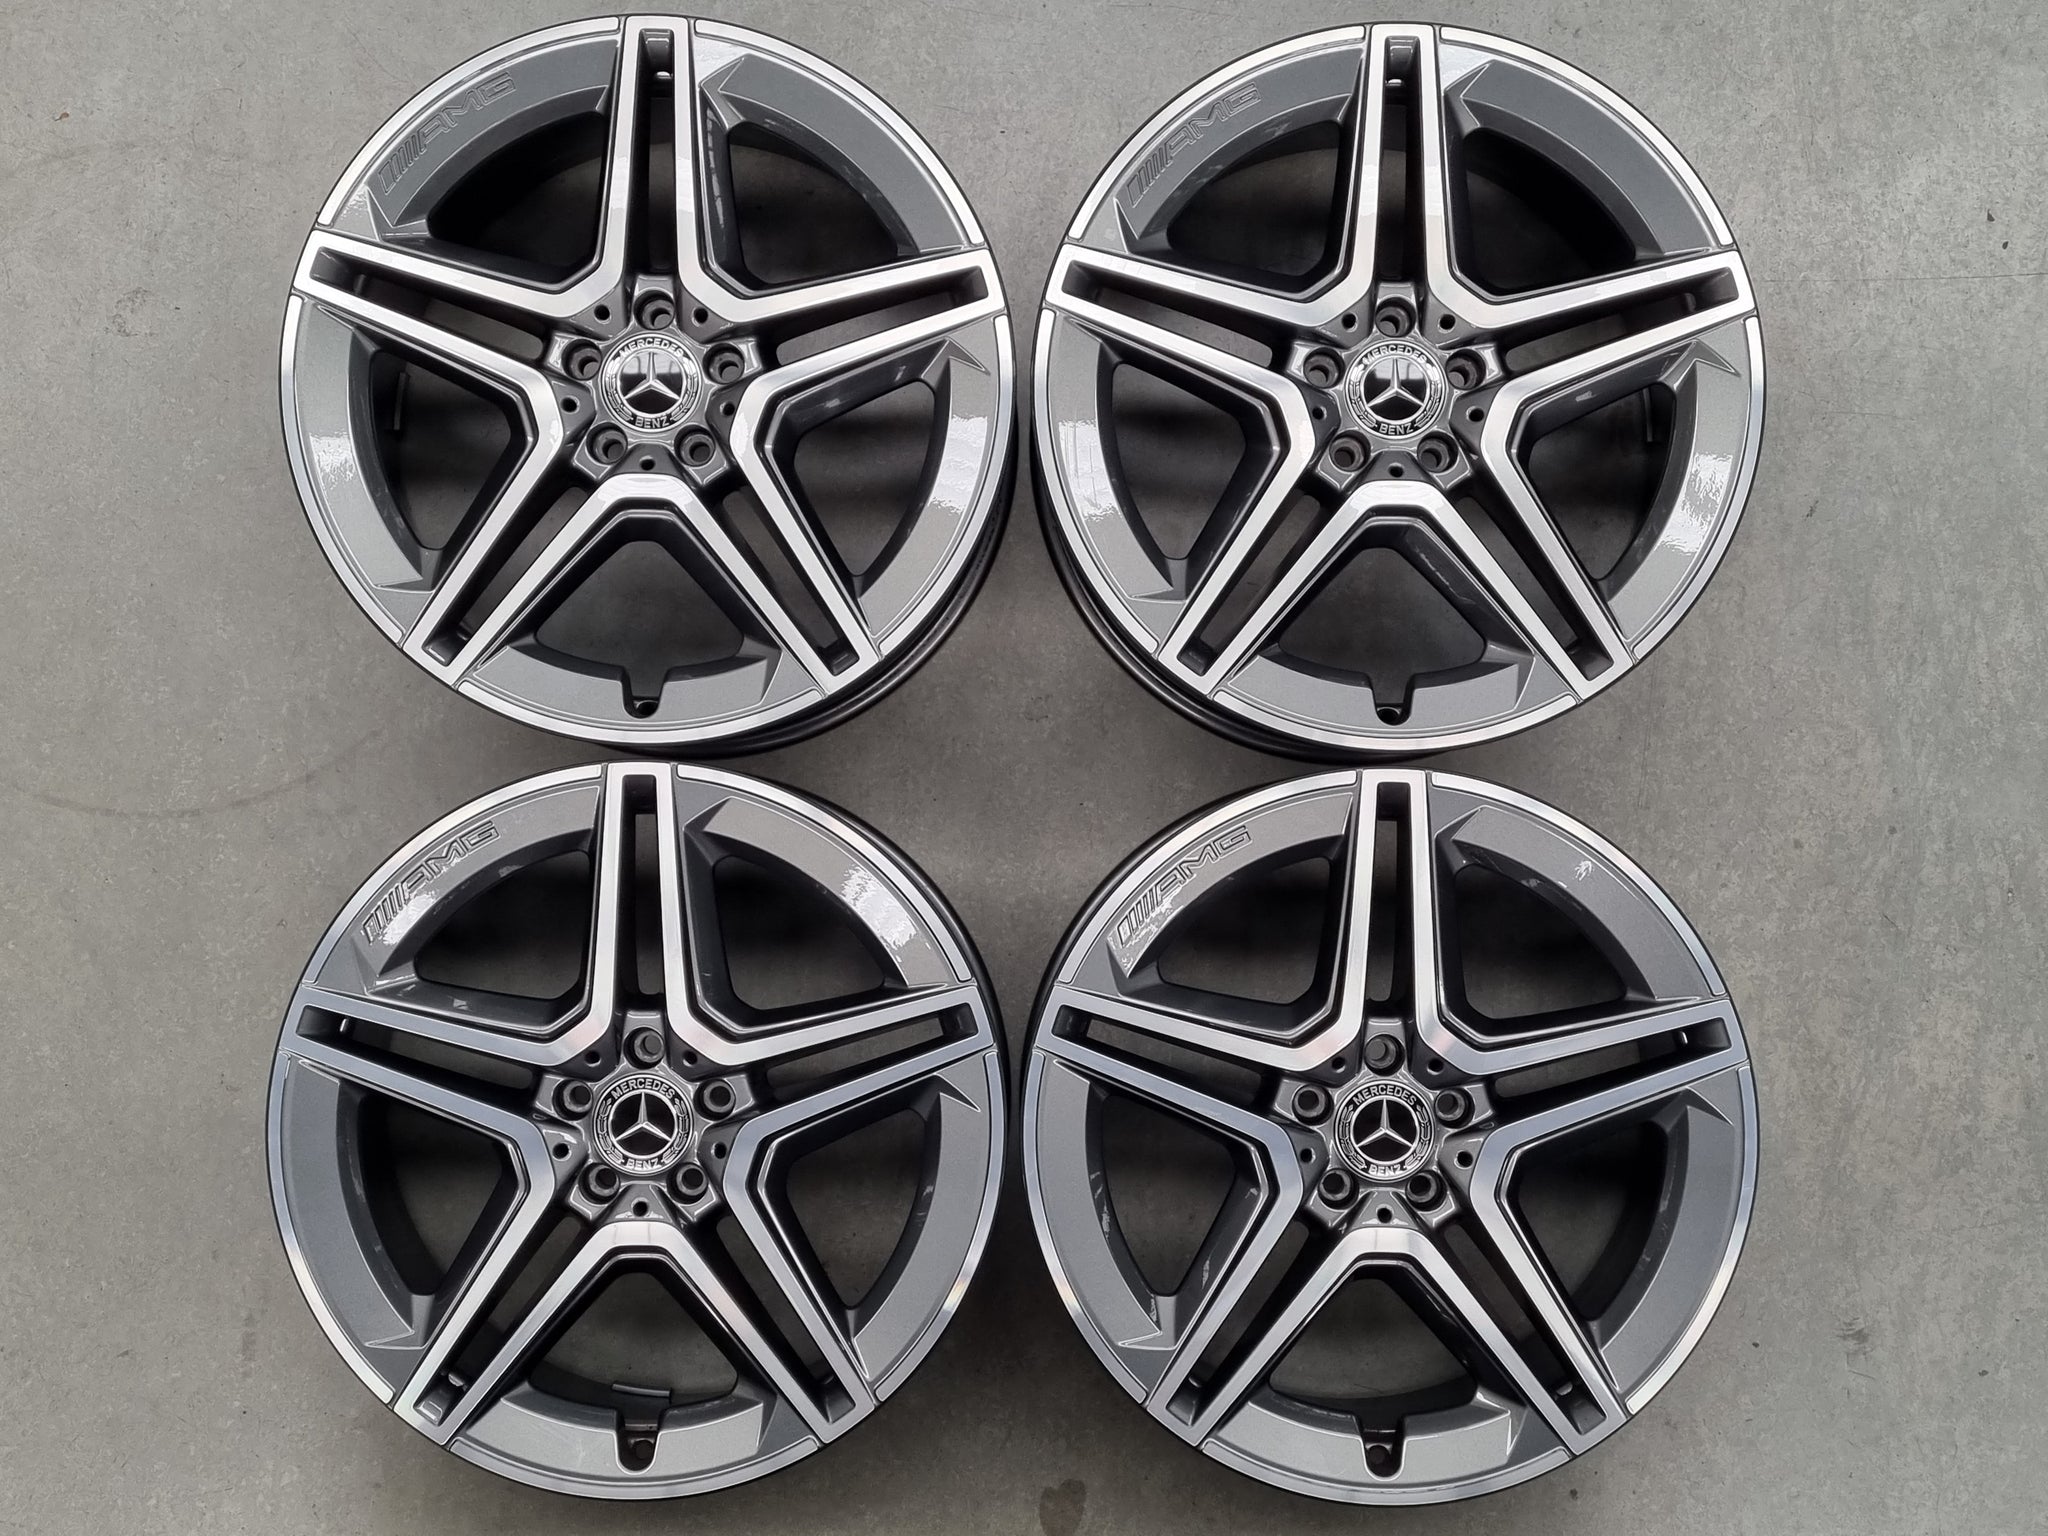 Load image into Gallery viewer, Genuine Mercedes GLE 2021 Model AMG 20 Inch Wheels Set of 4
